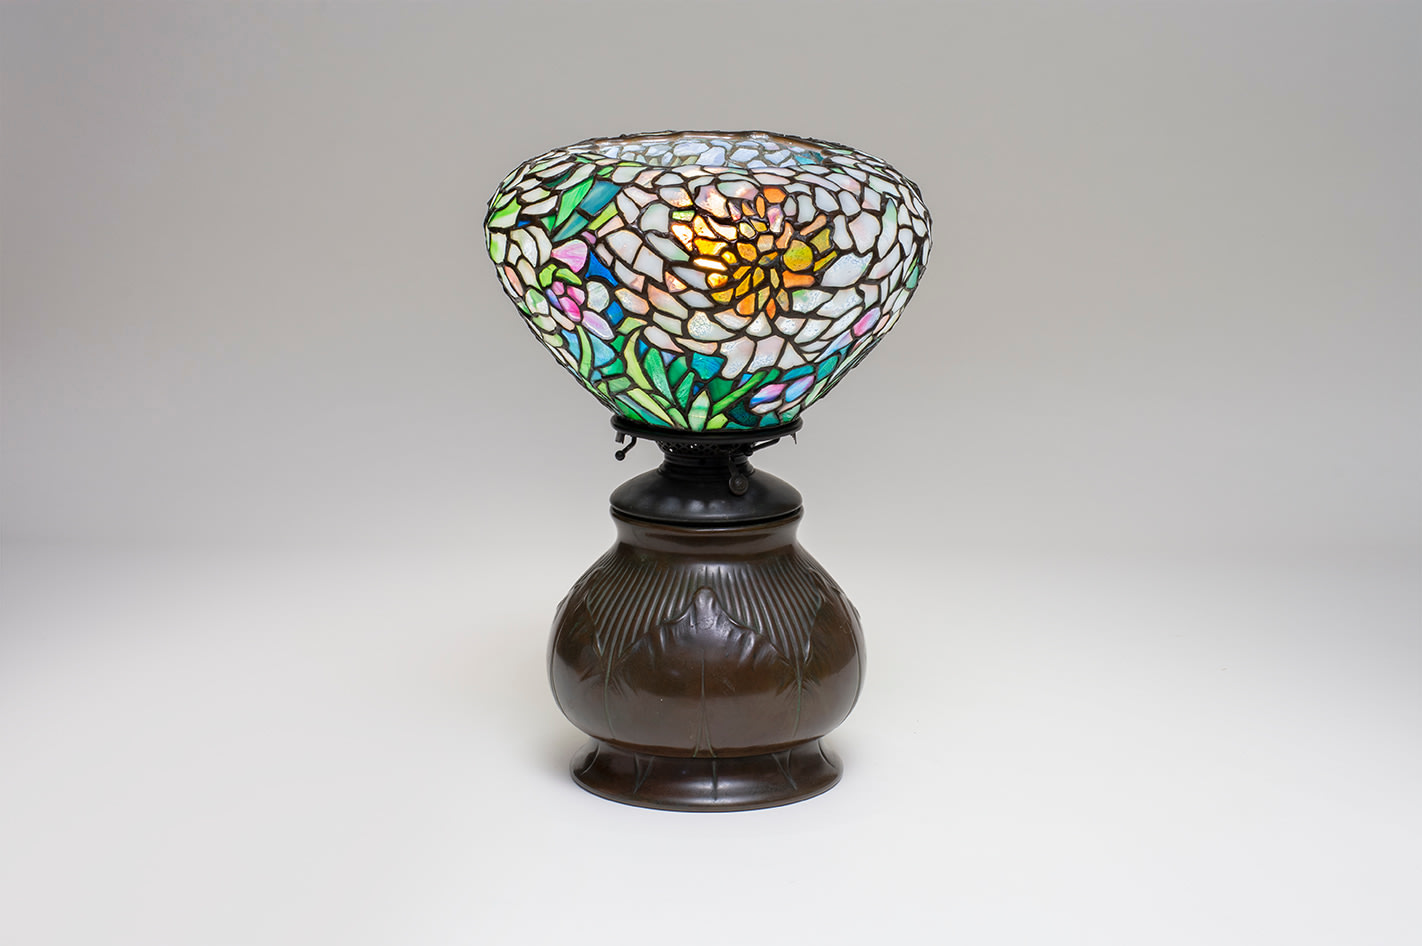 an early peony tiffany lamp, the shade a torchiere shape based on earlier blown glass shades, on a bulbous bronze base decorated with tobacco leaf motif originally intended as an oil lamp base